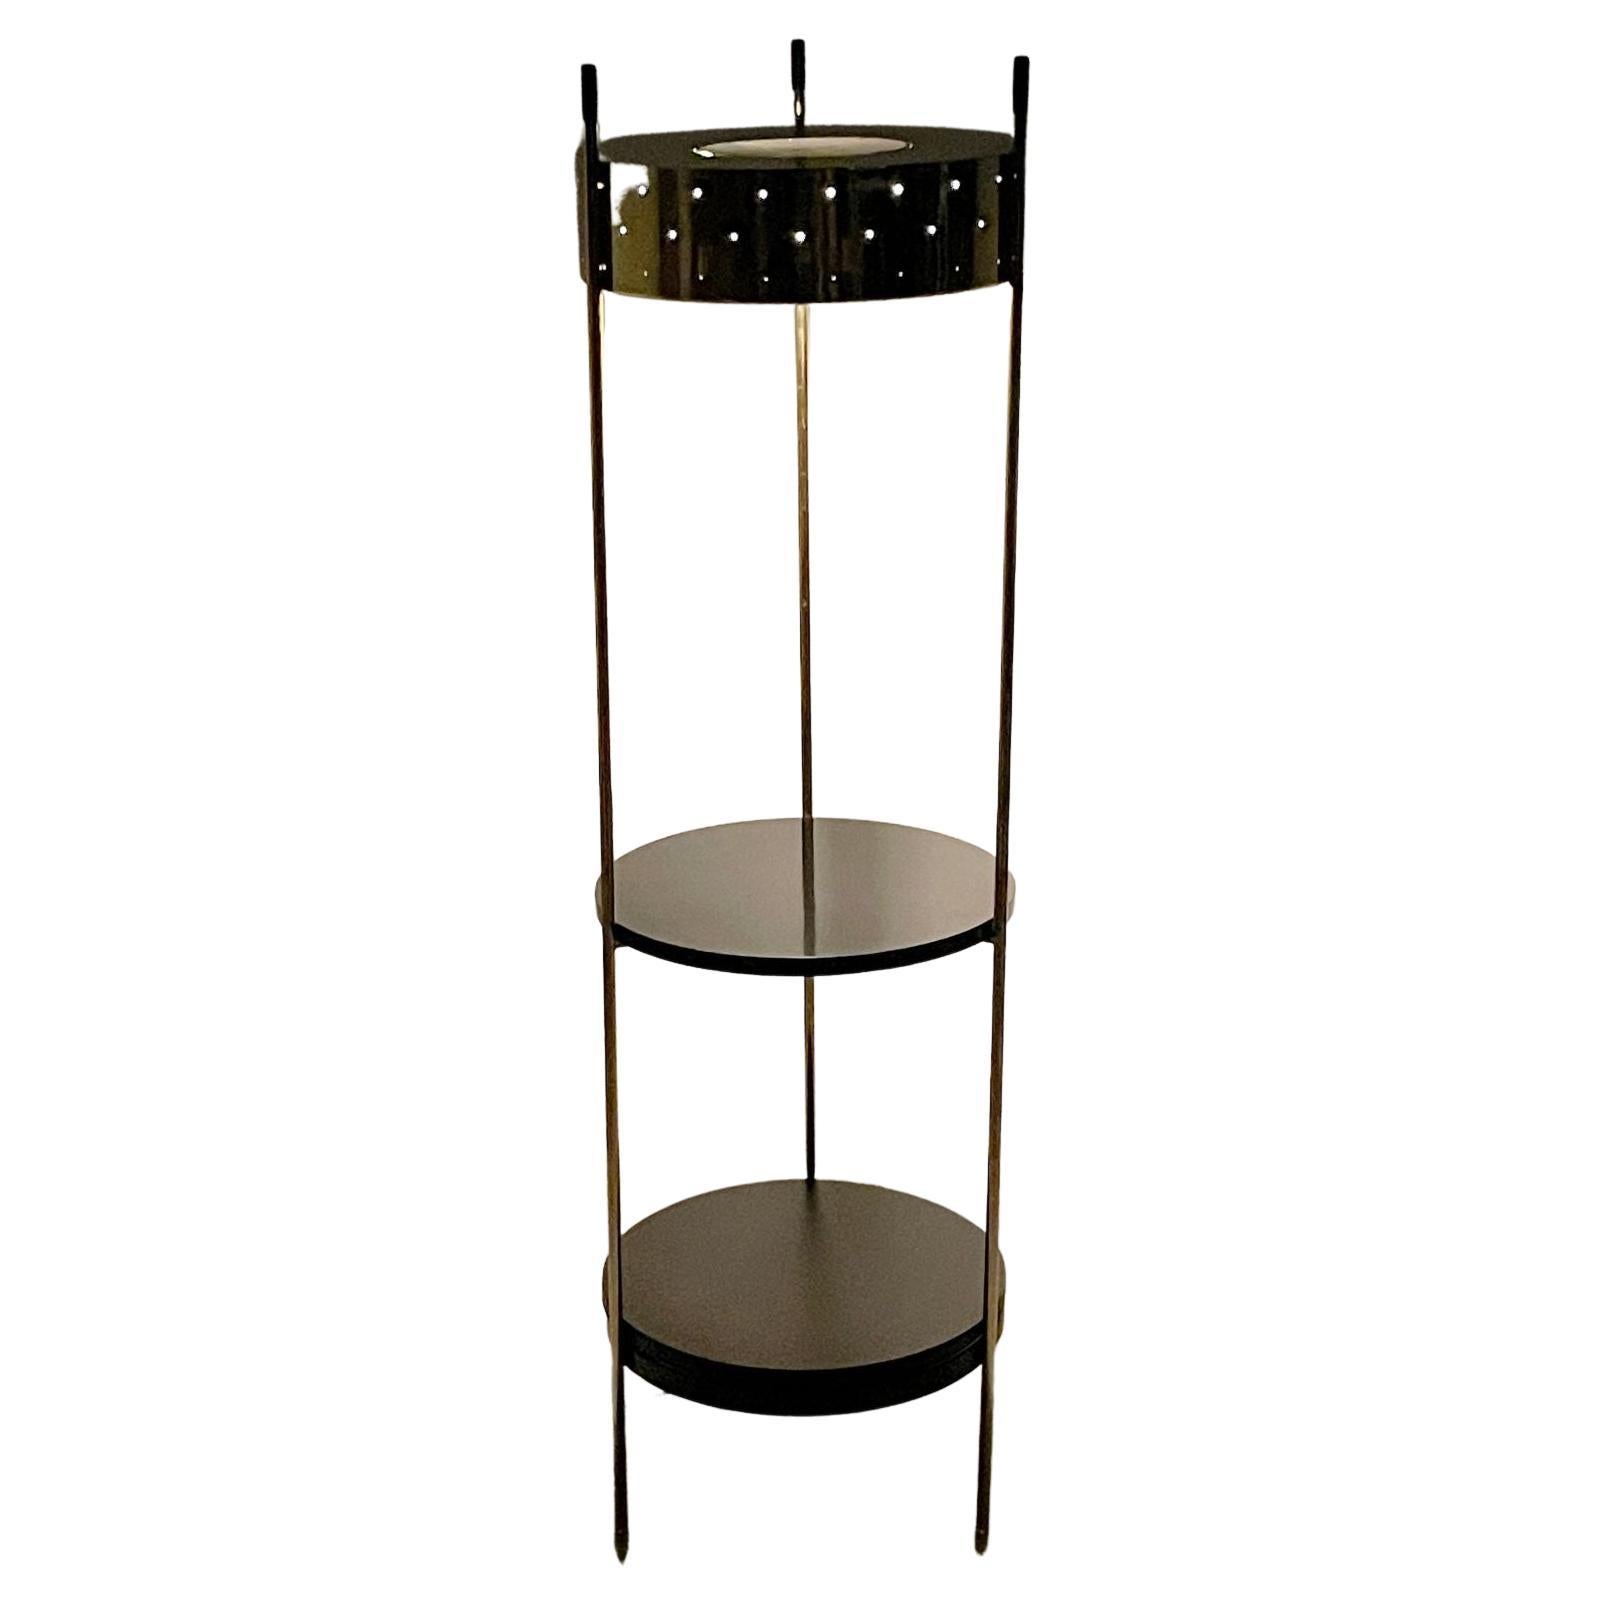 Vintage Mid Century Modern Laurel Brass Floor Lamp with Shelves 1960s

Incredible brass floor lamp etagere by Laurel circa 1960s
Pierced brass cylinder shade atop two lower round shelves
Interchangeable lower shelf and black metal